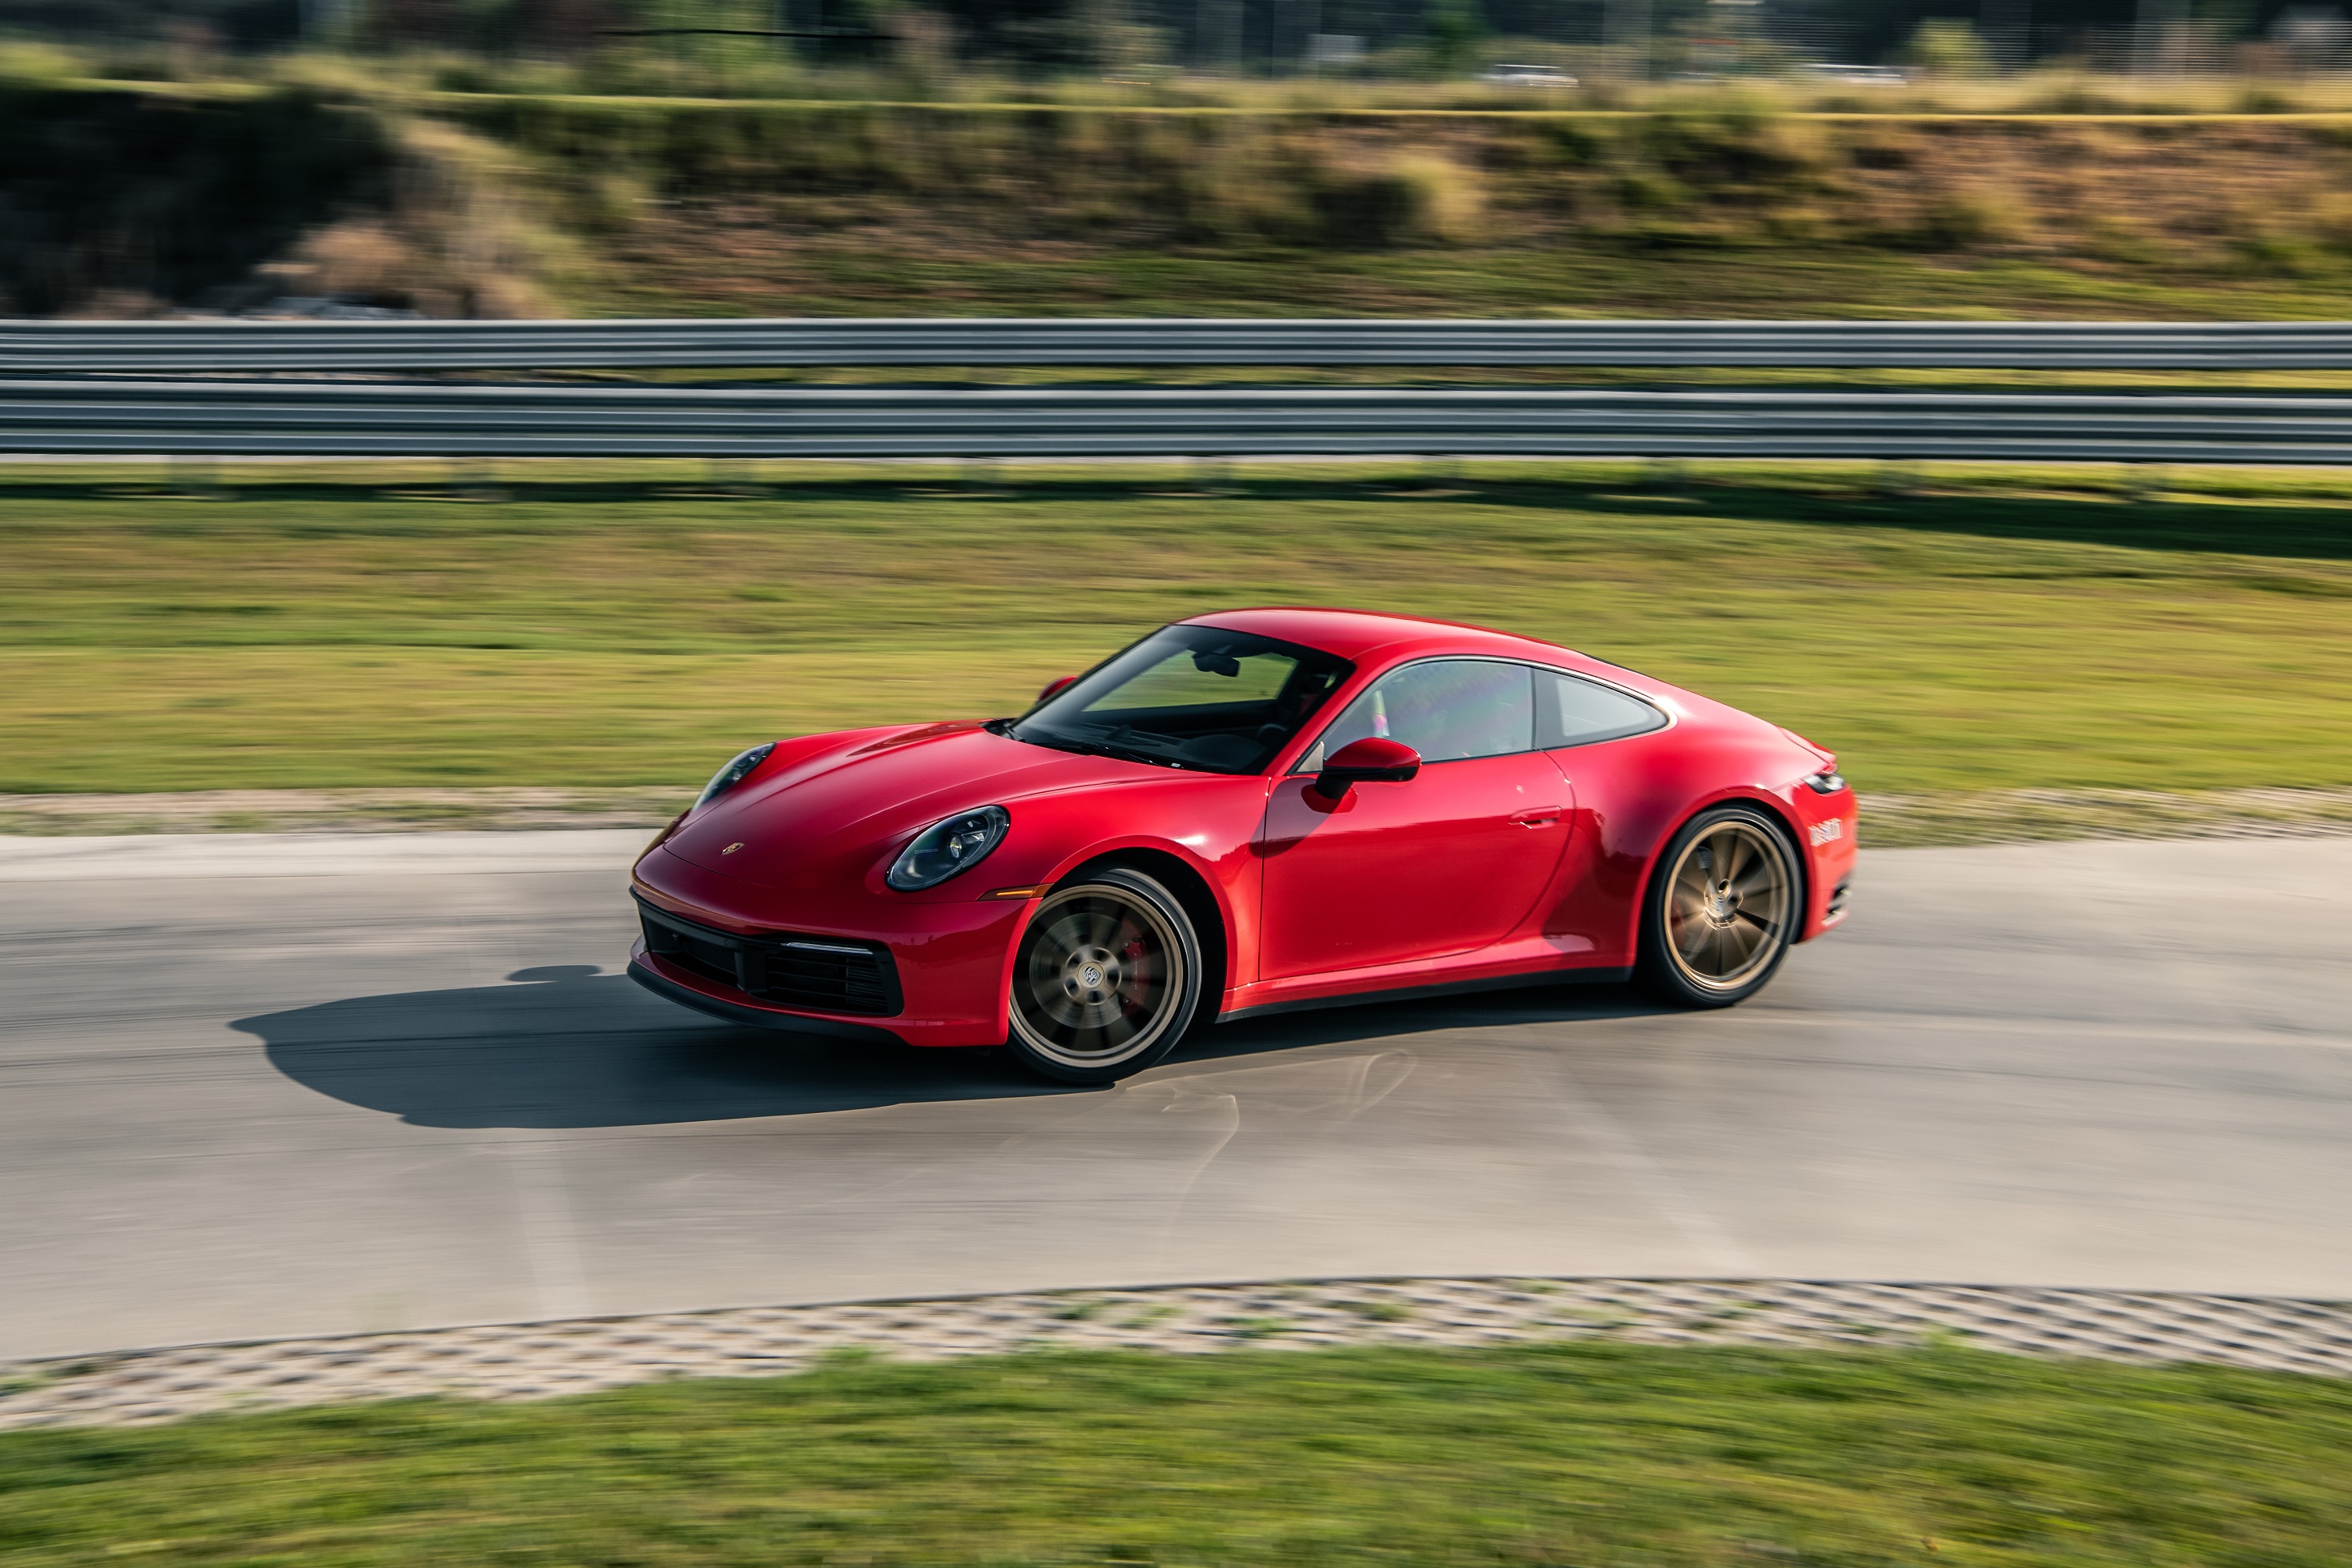 A red 2022 Porsche 911 Carrera S drives on a race track